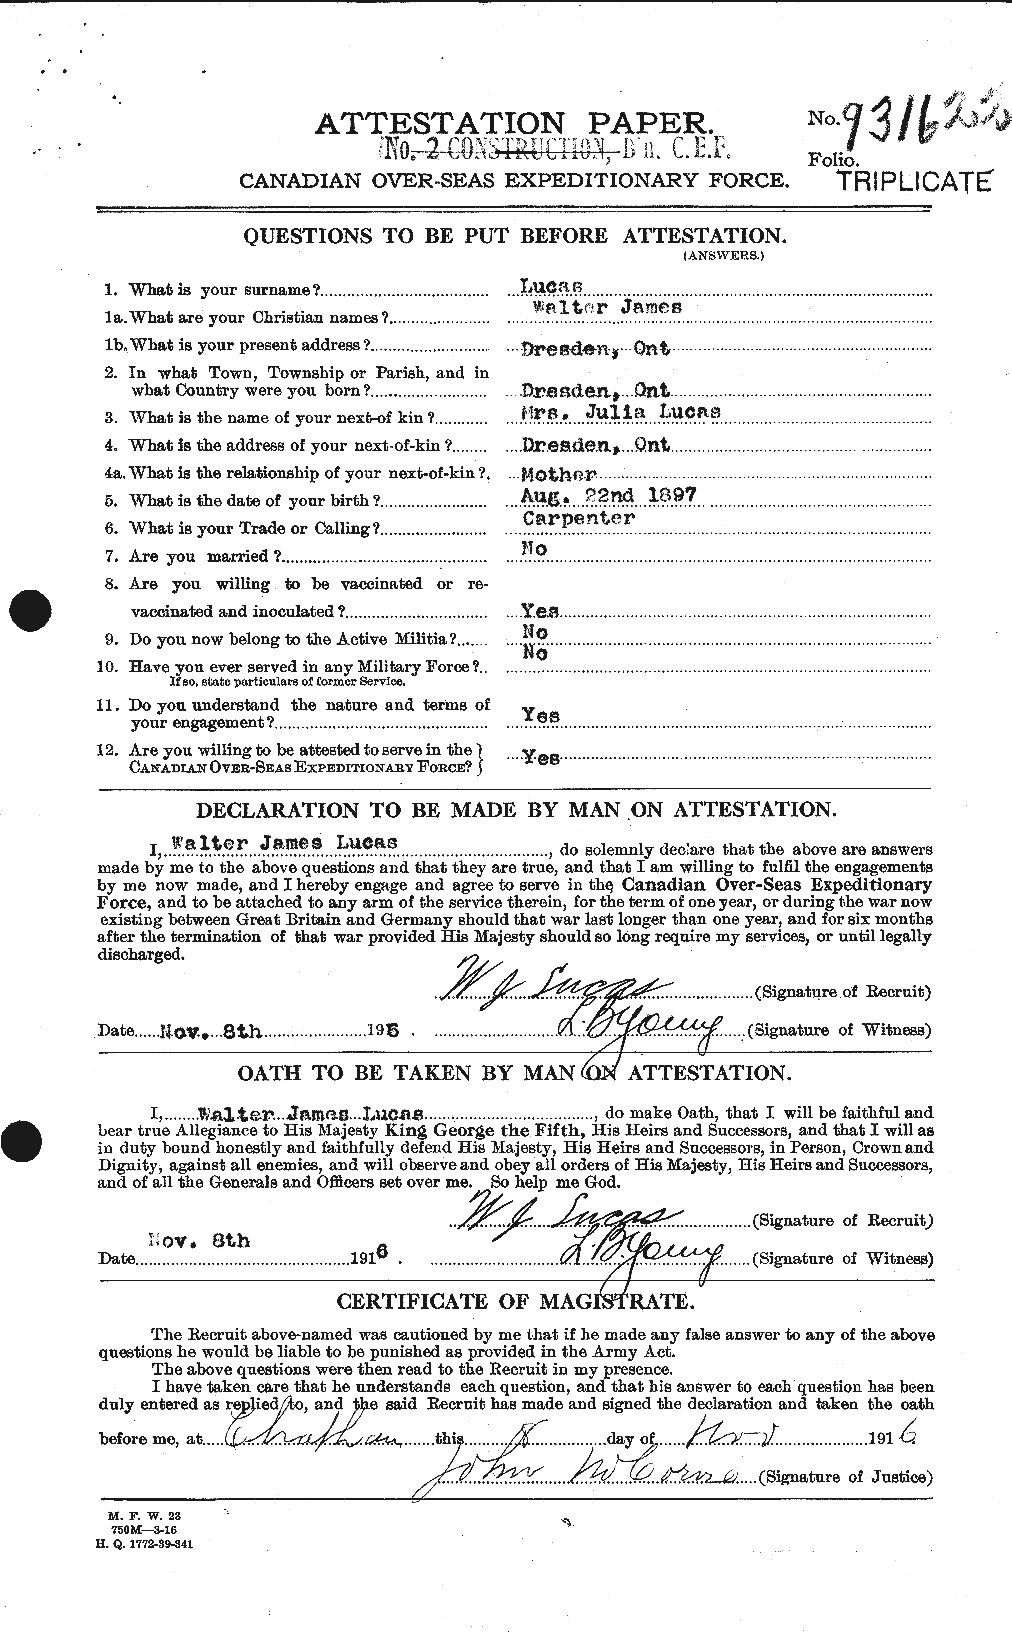 Personnel Records of the First World War - CEF 478291a